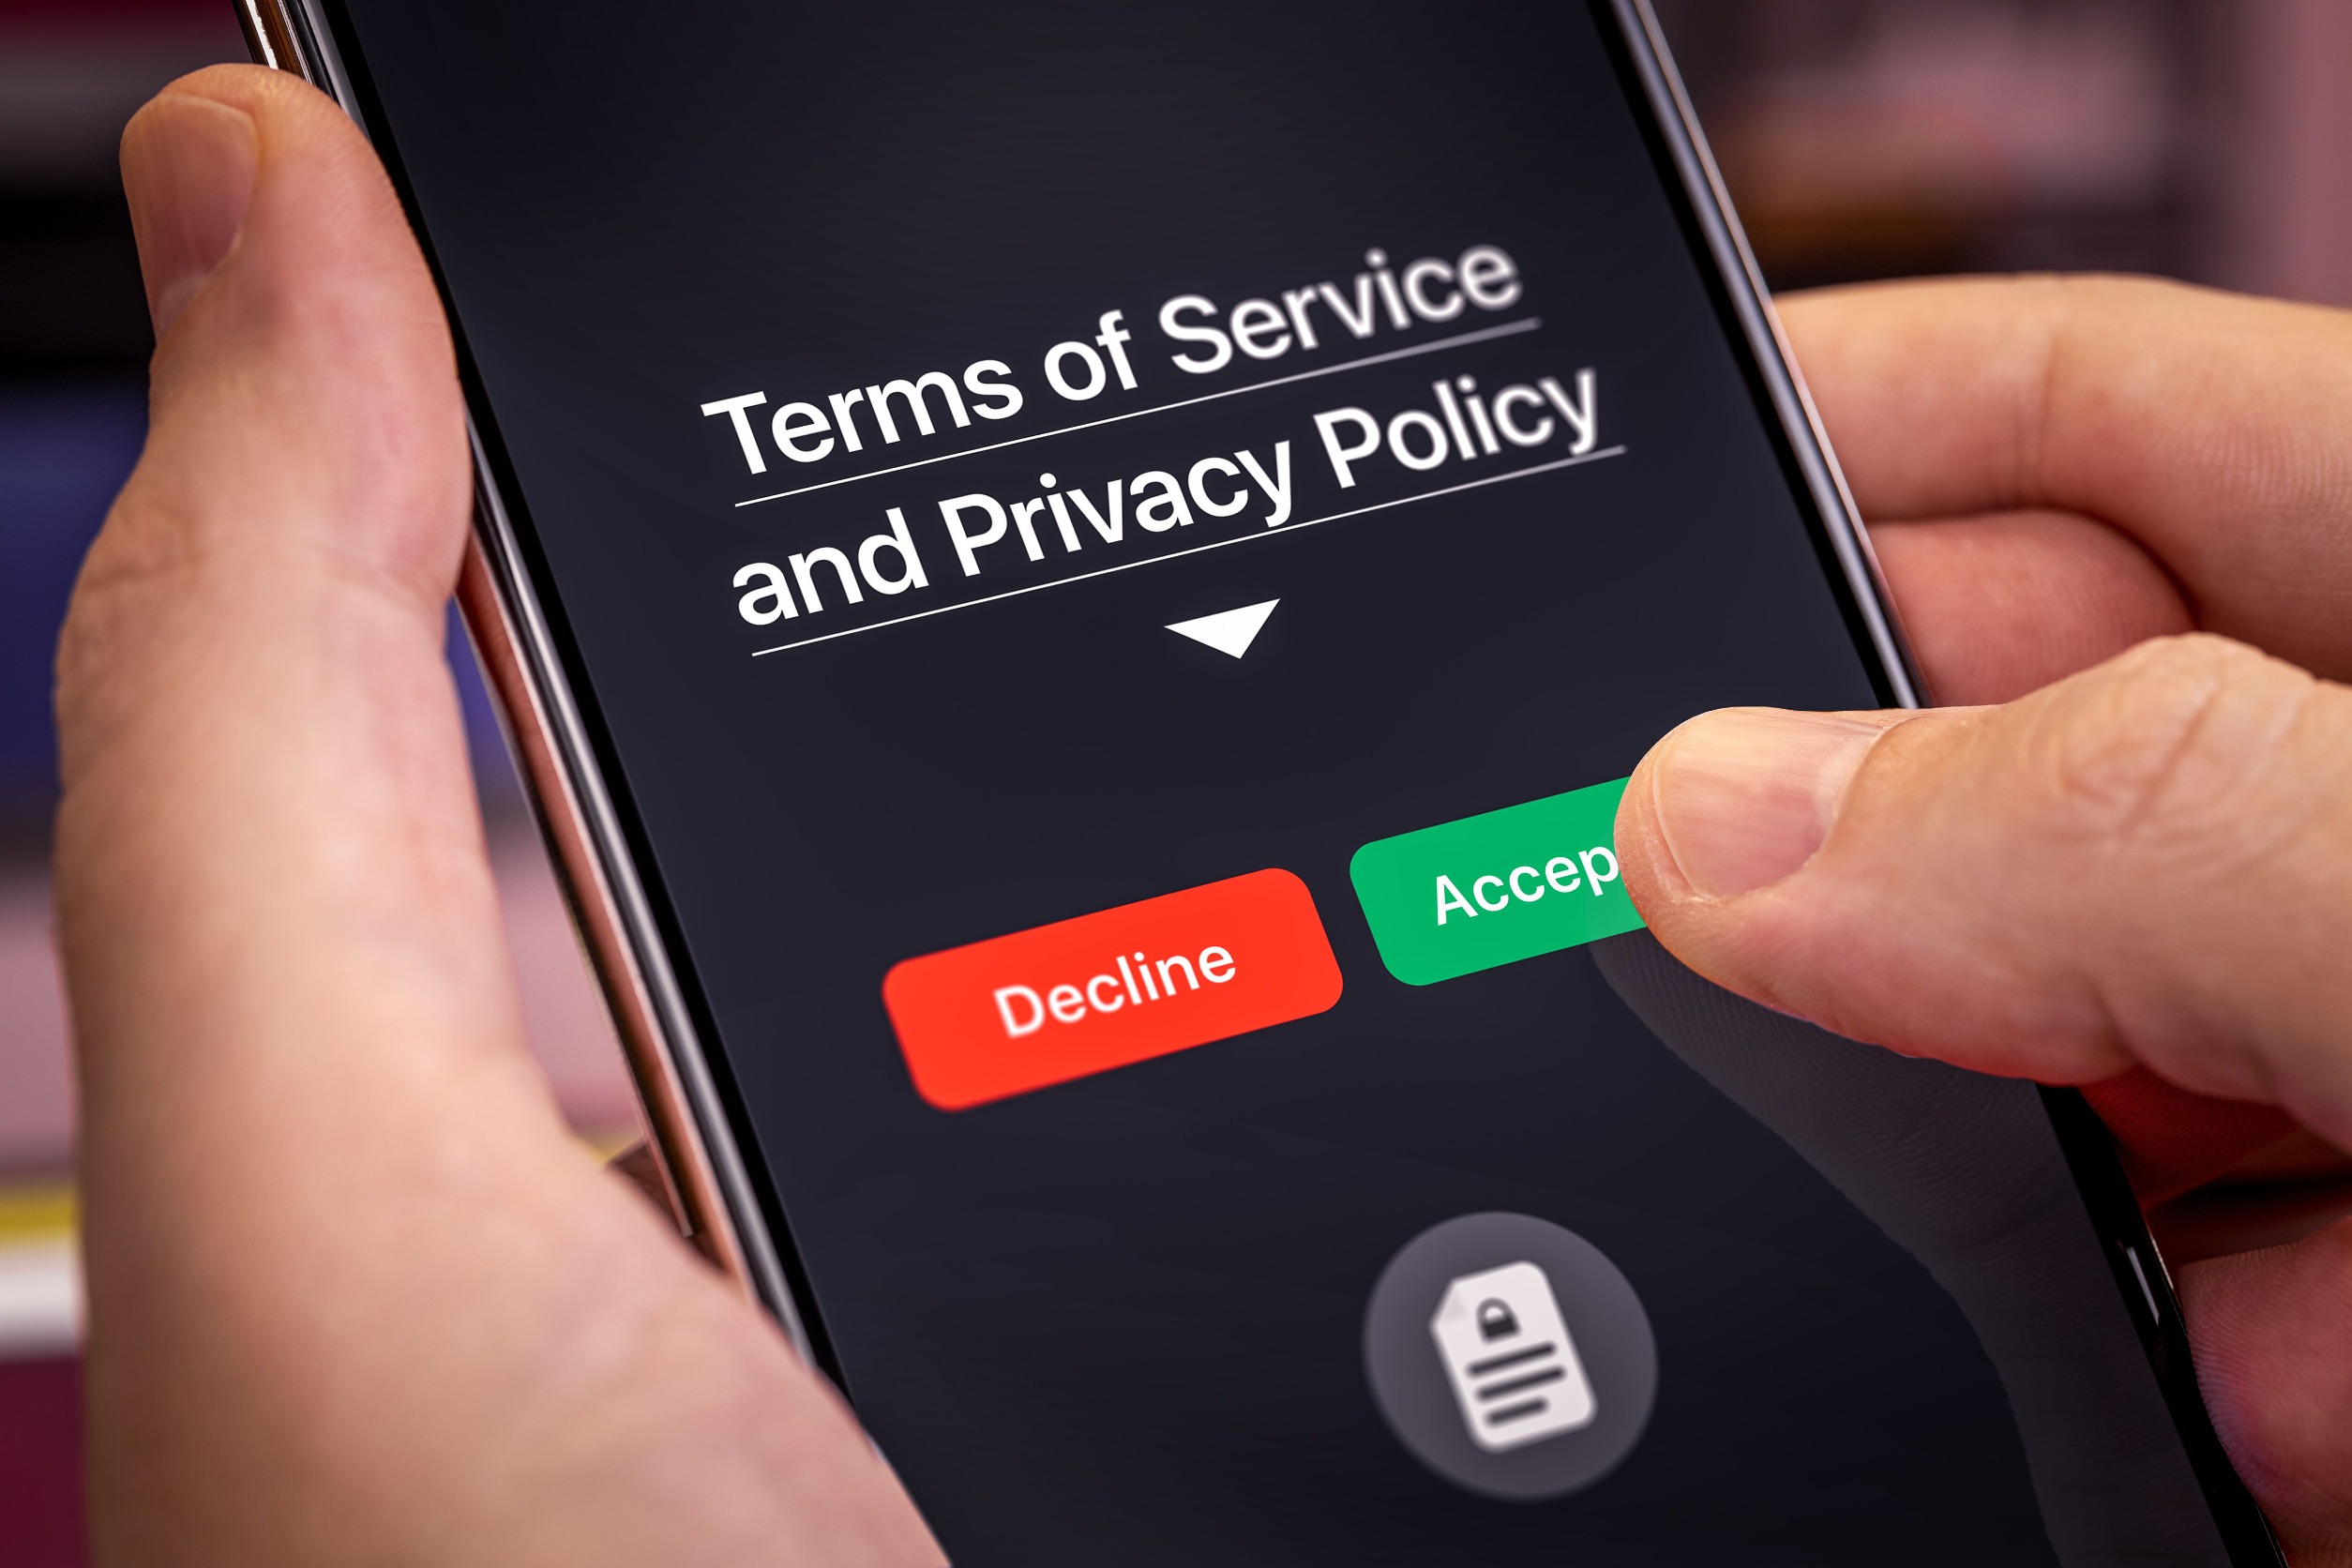 Man agreegin to Privacy policy and terms of service on smart phone